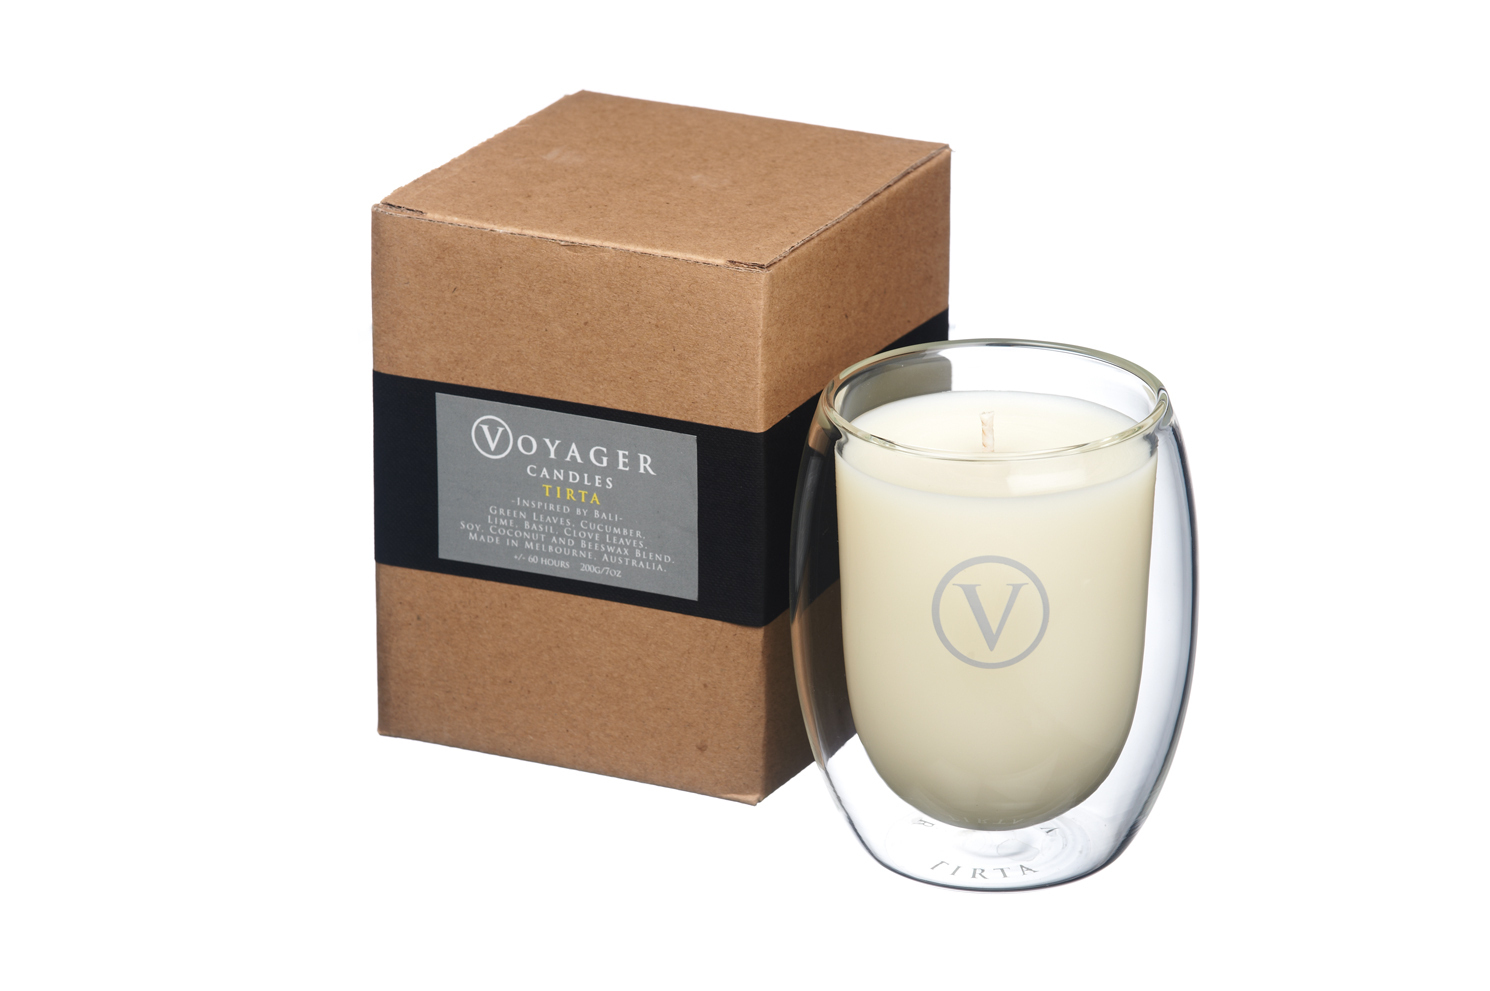 Voyager candle